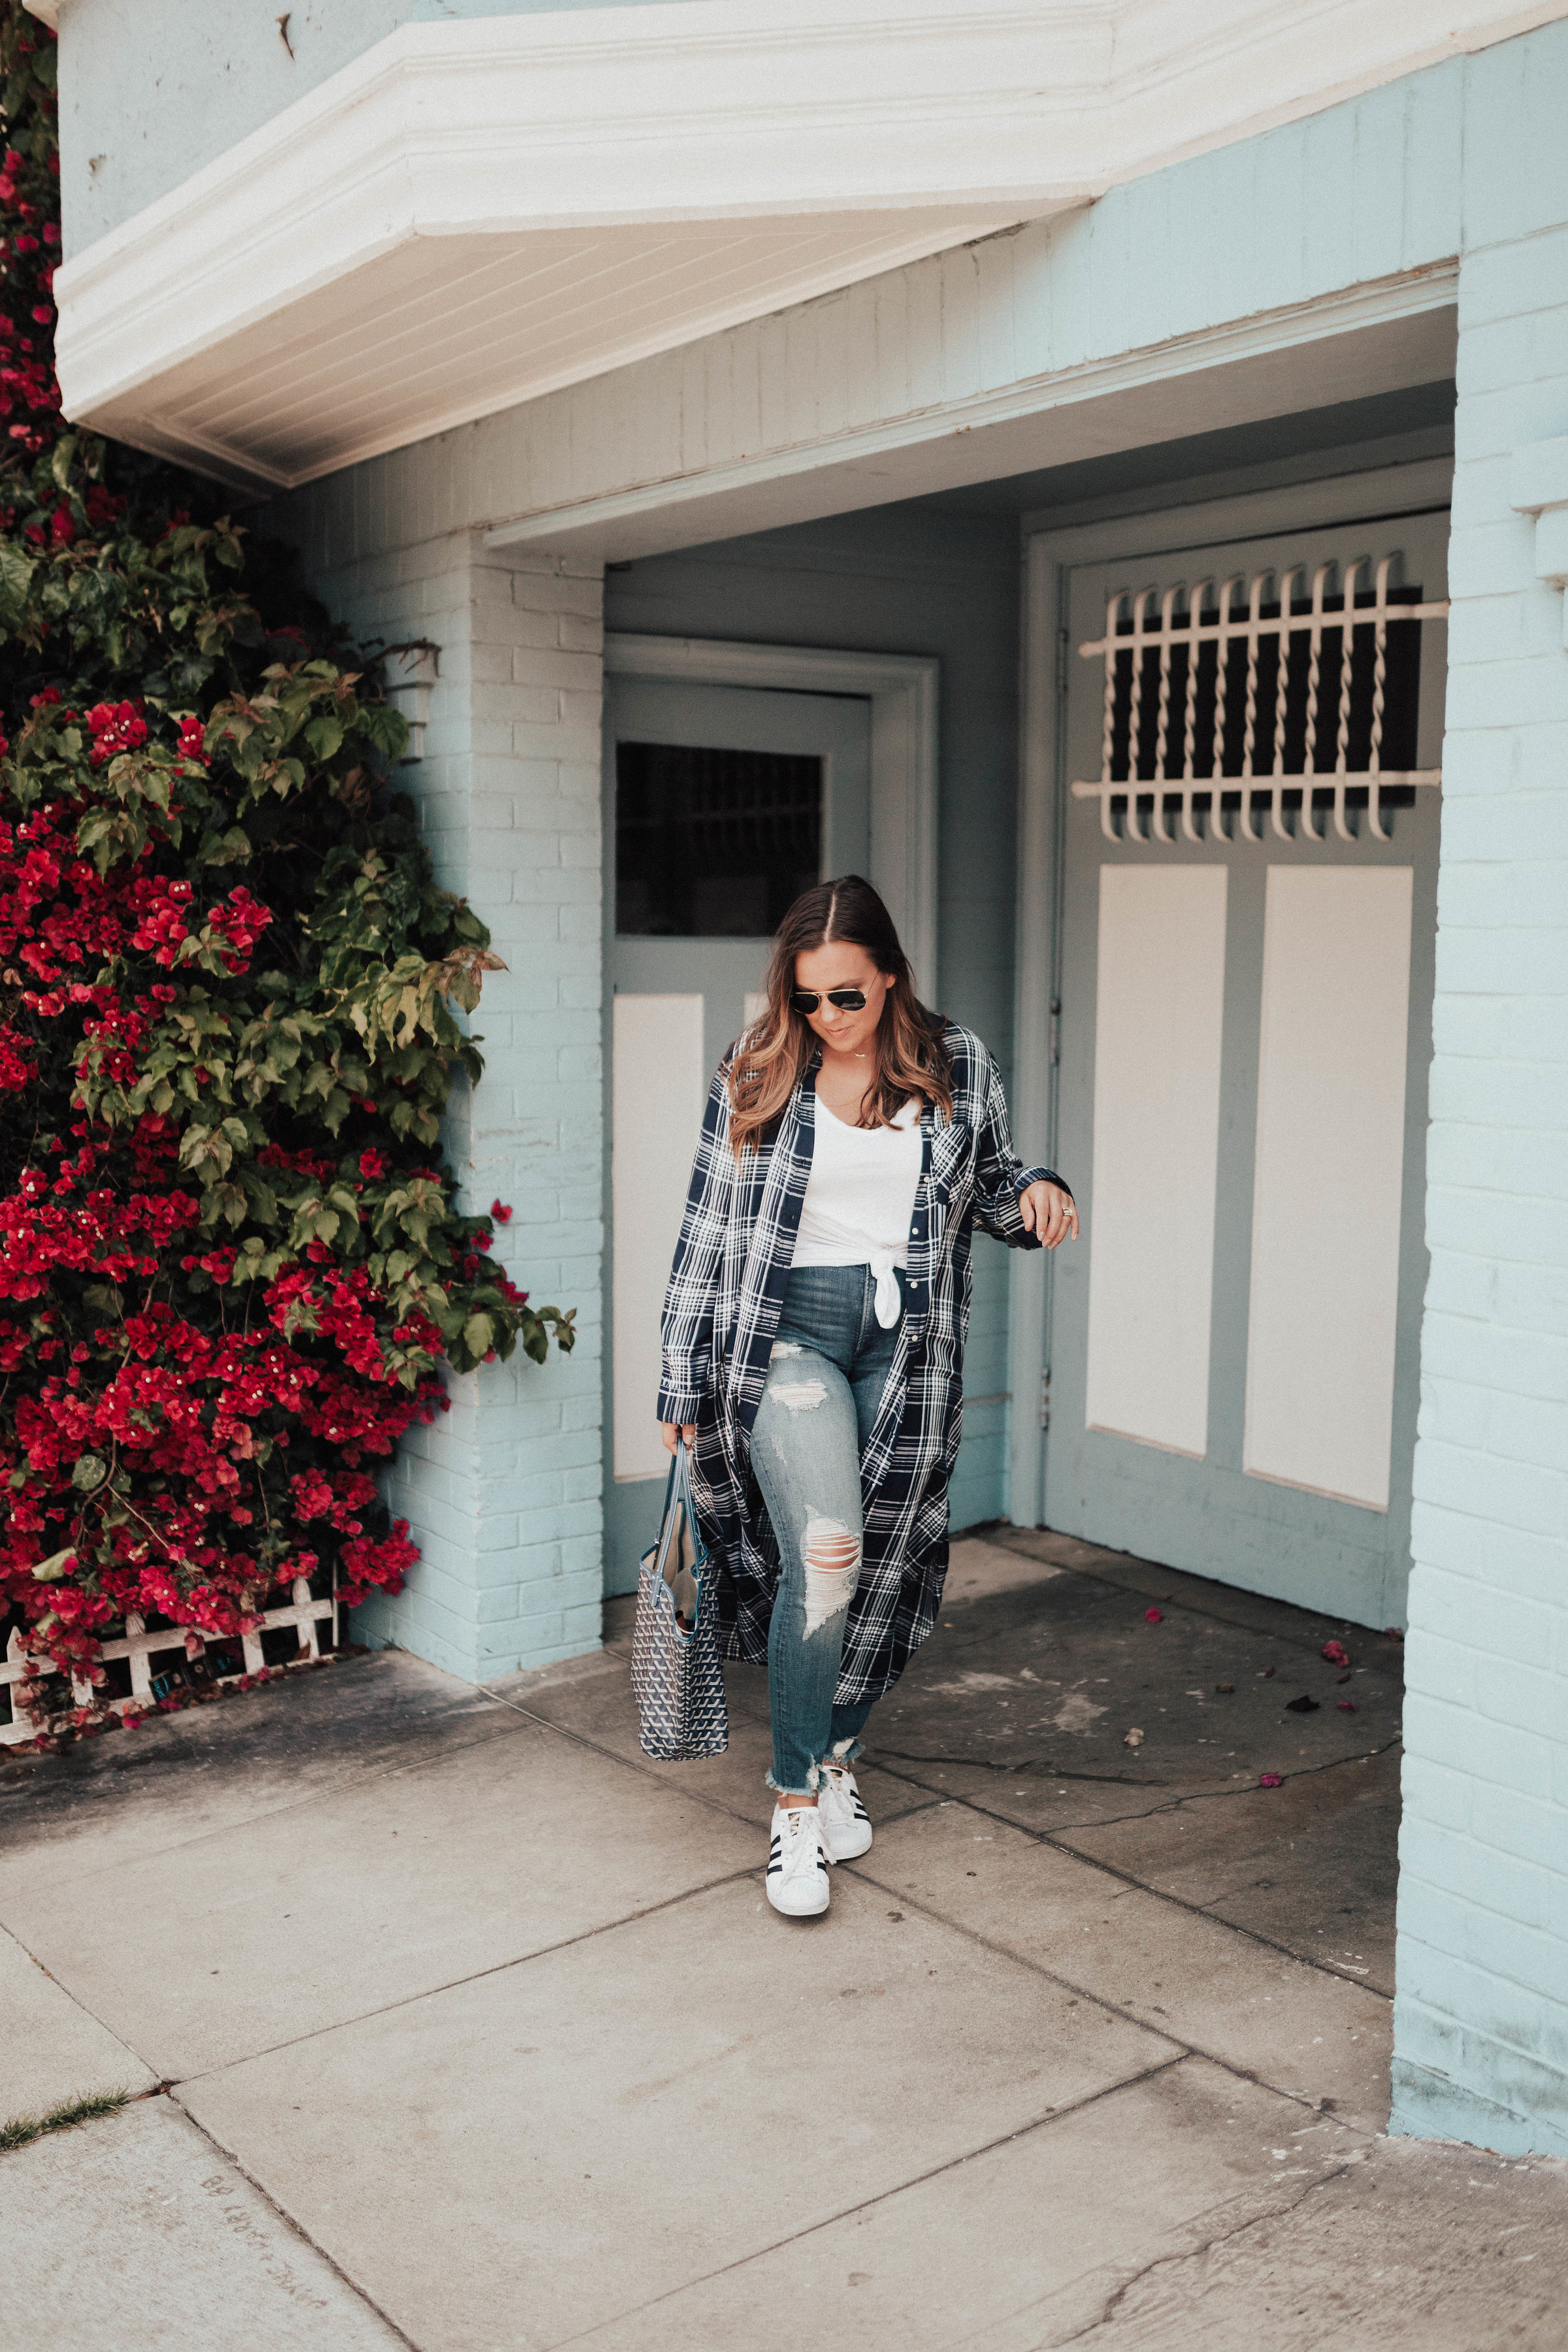 Ashley Zeal from Two Peas in a Prada shares all the best Labor Day Sales 2018. Featuring Express, Aerie, Urban Outfitters and more!